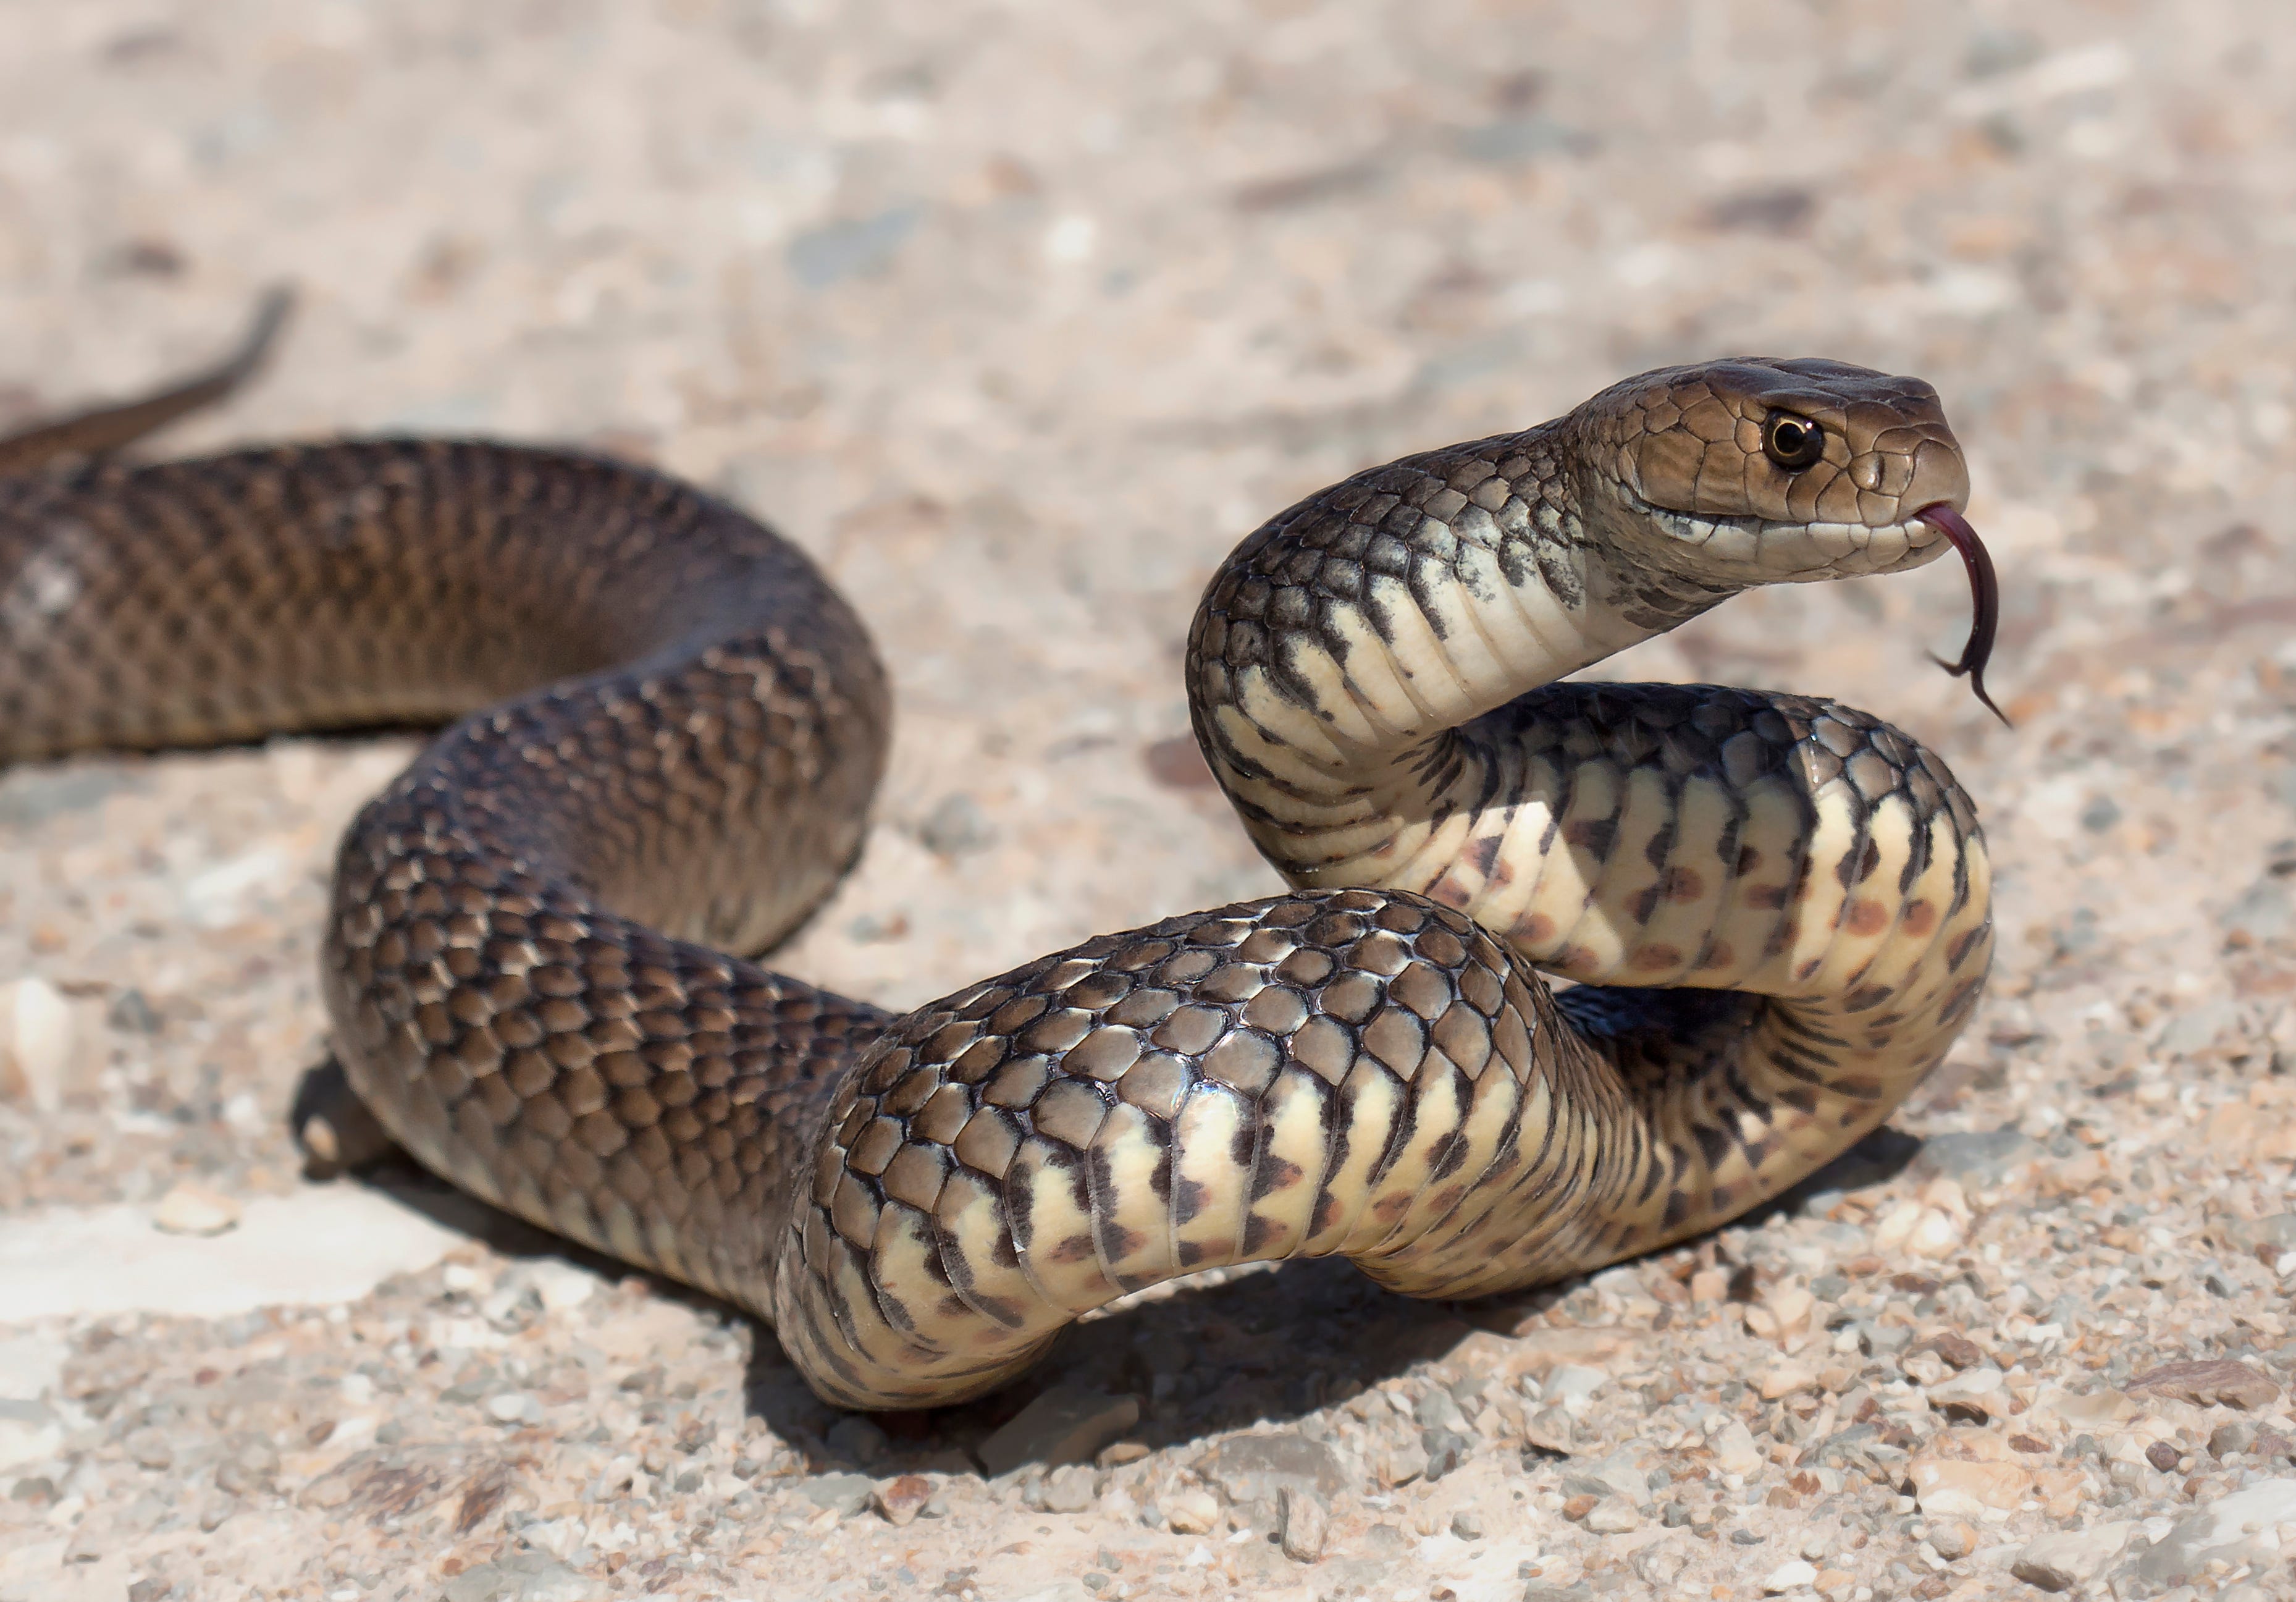 Australian man fights, kills deadly snake while driving on